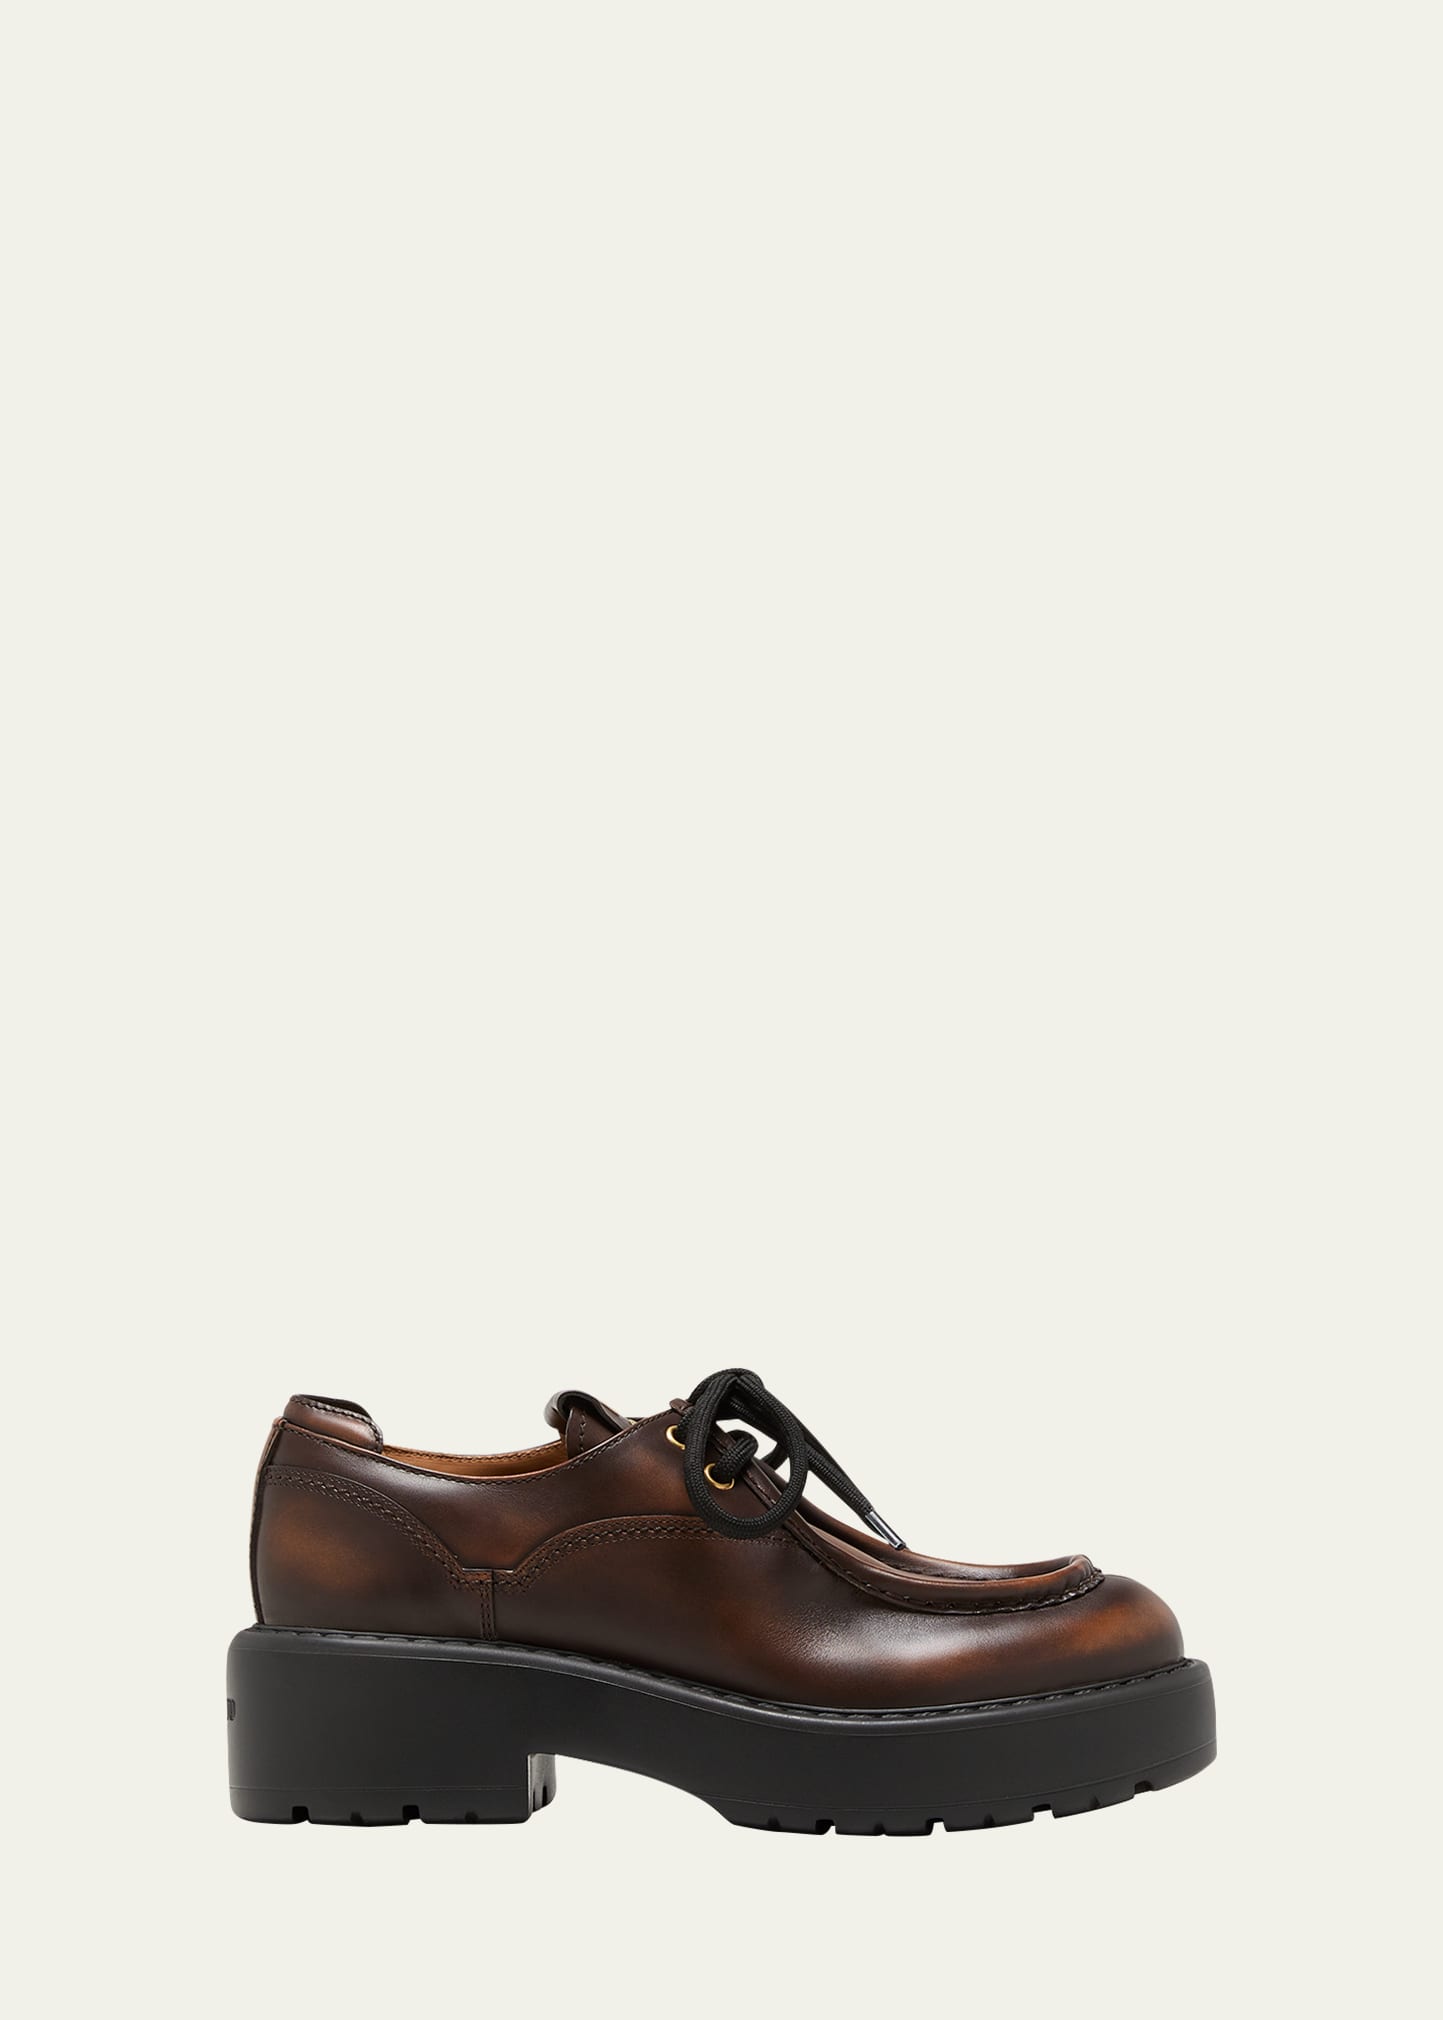 Chunky lace up derby shoe, Lace-Ups & Oxfords, Men's